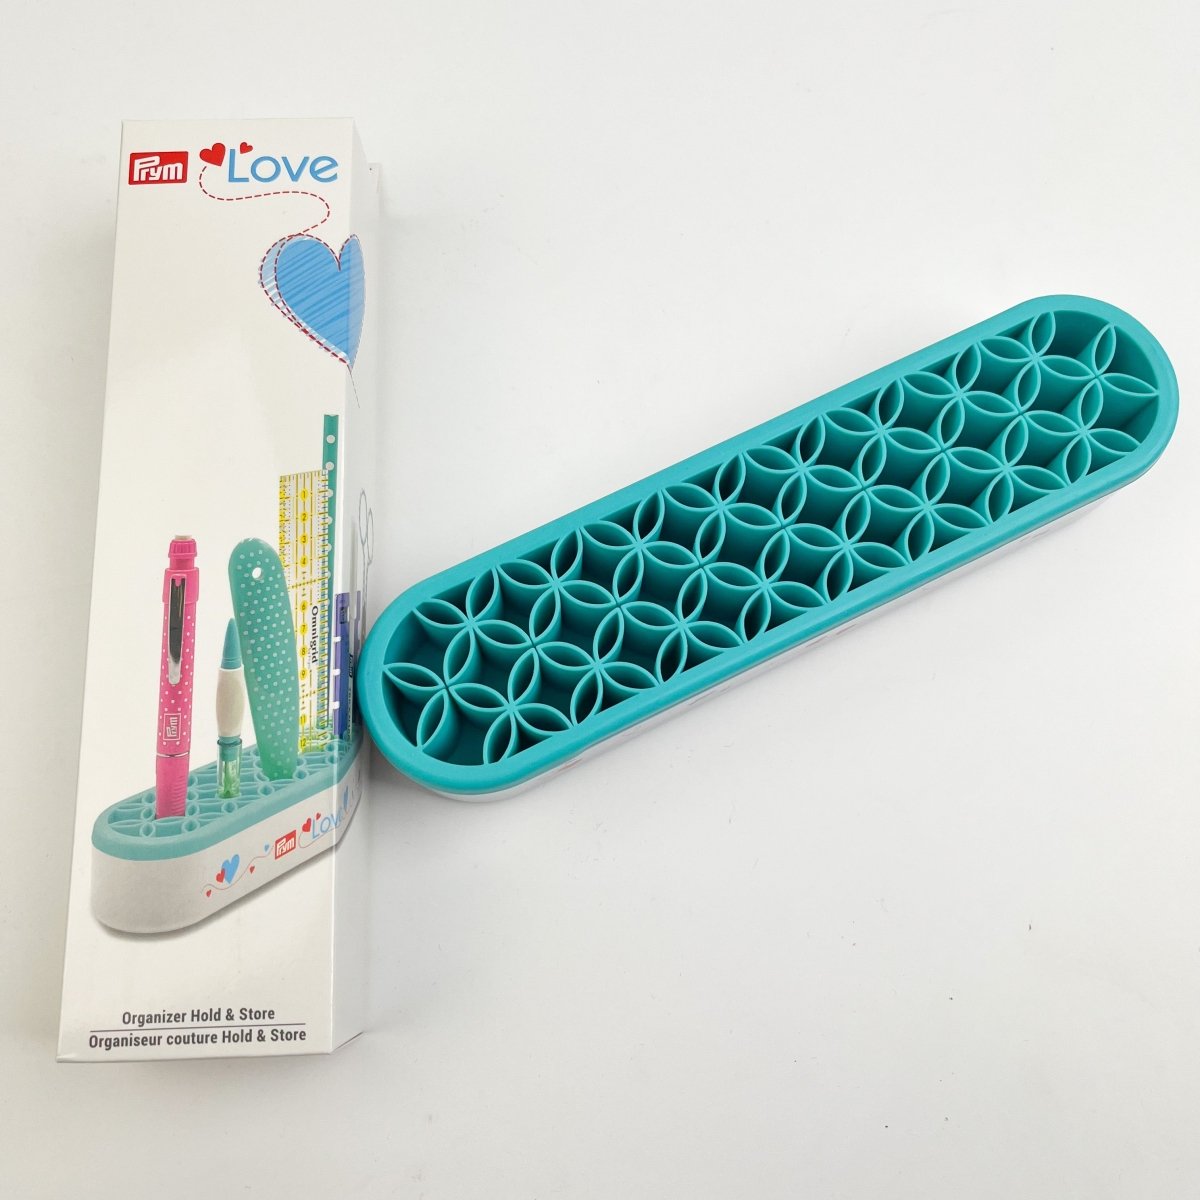 Prym Love - Organiser - Hold and Store - Sewing Gem